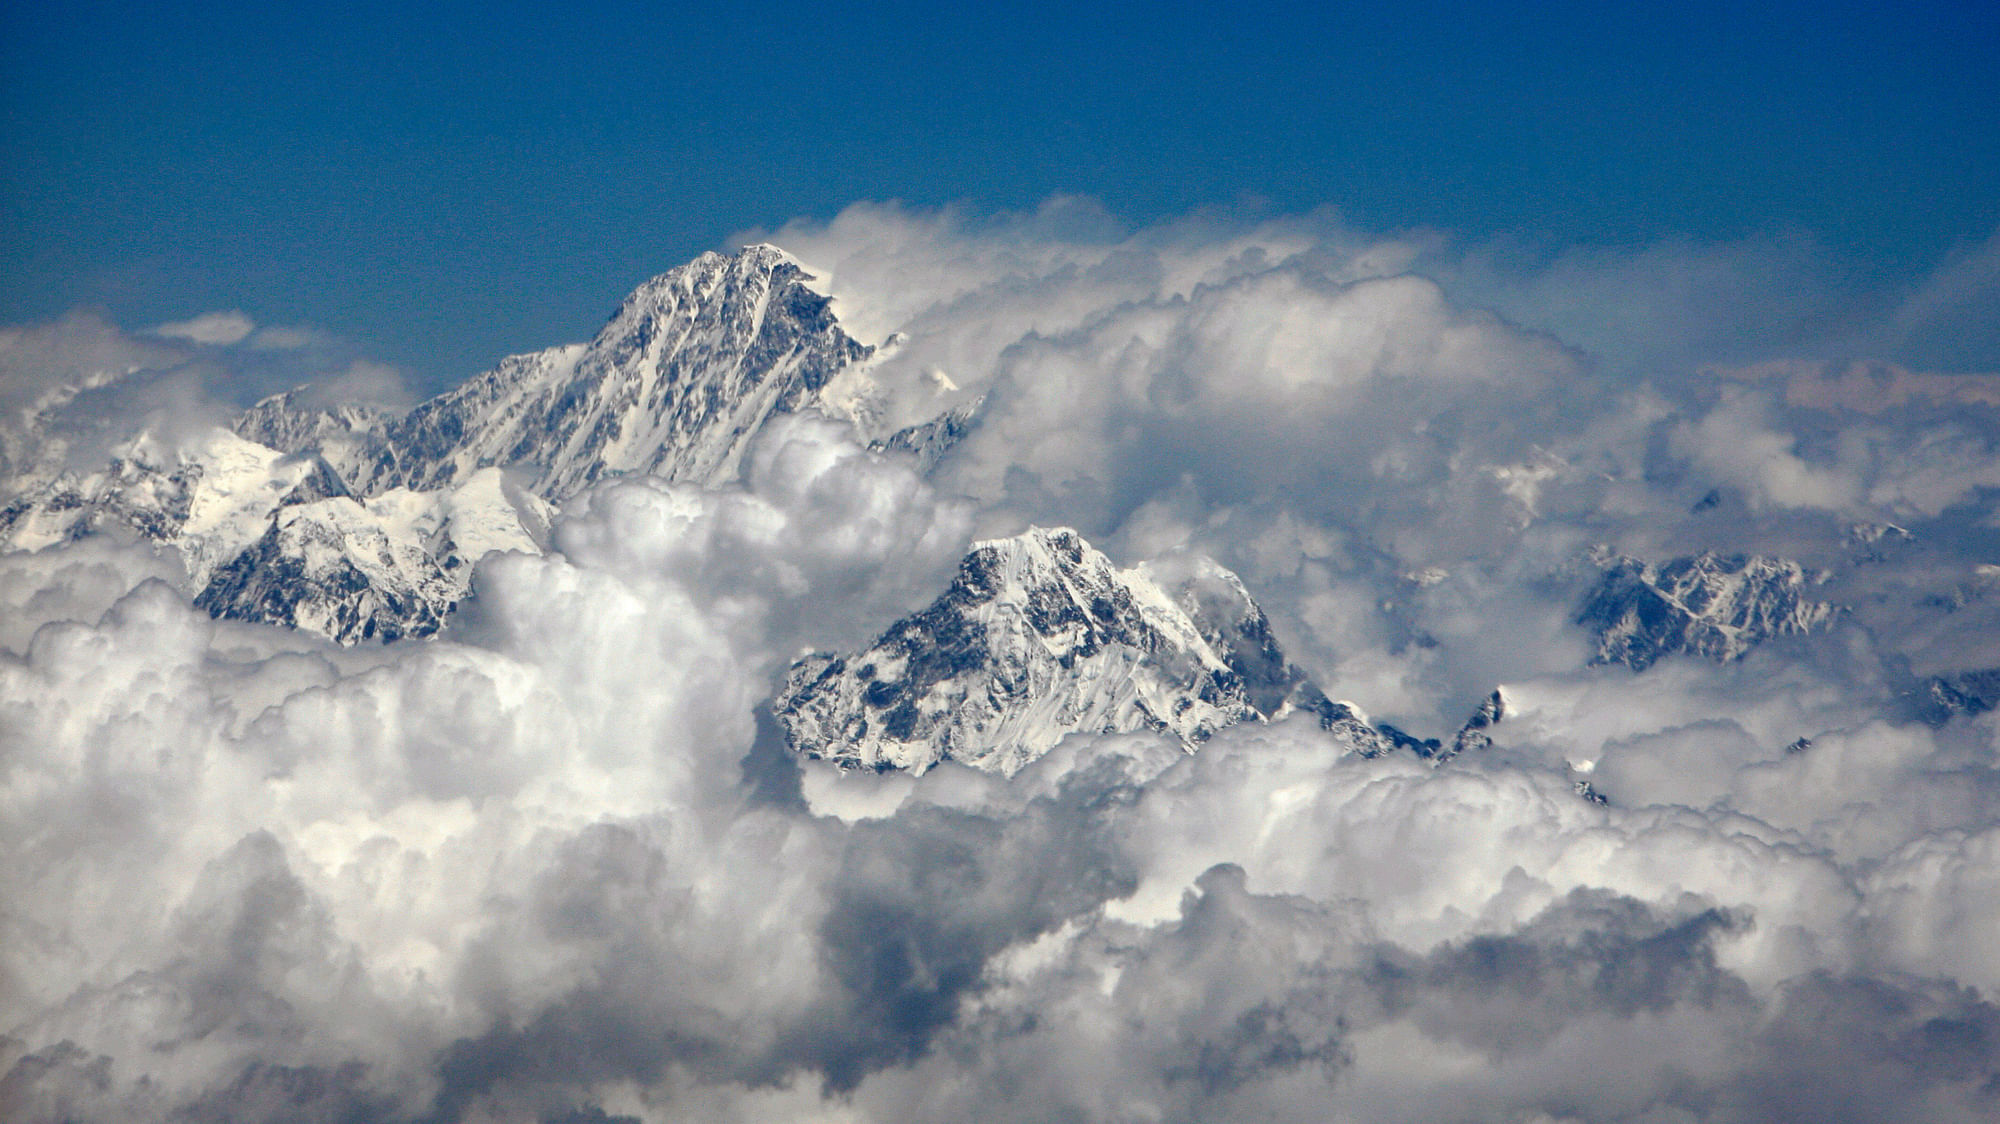 Mount Everest, the highest peak in the world with an altitude of 8.848 metres (29.028 ft) is seen in this aerial view next to 6.812 metres (22.349 feet) high Mount Ama Dablam (bottom right).&nbsp;